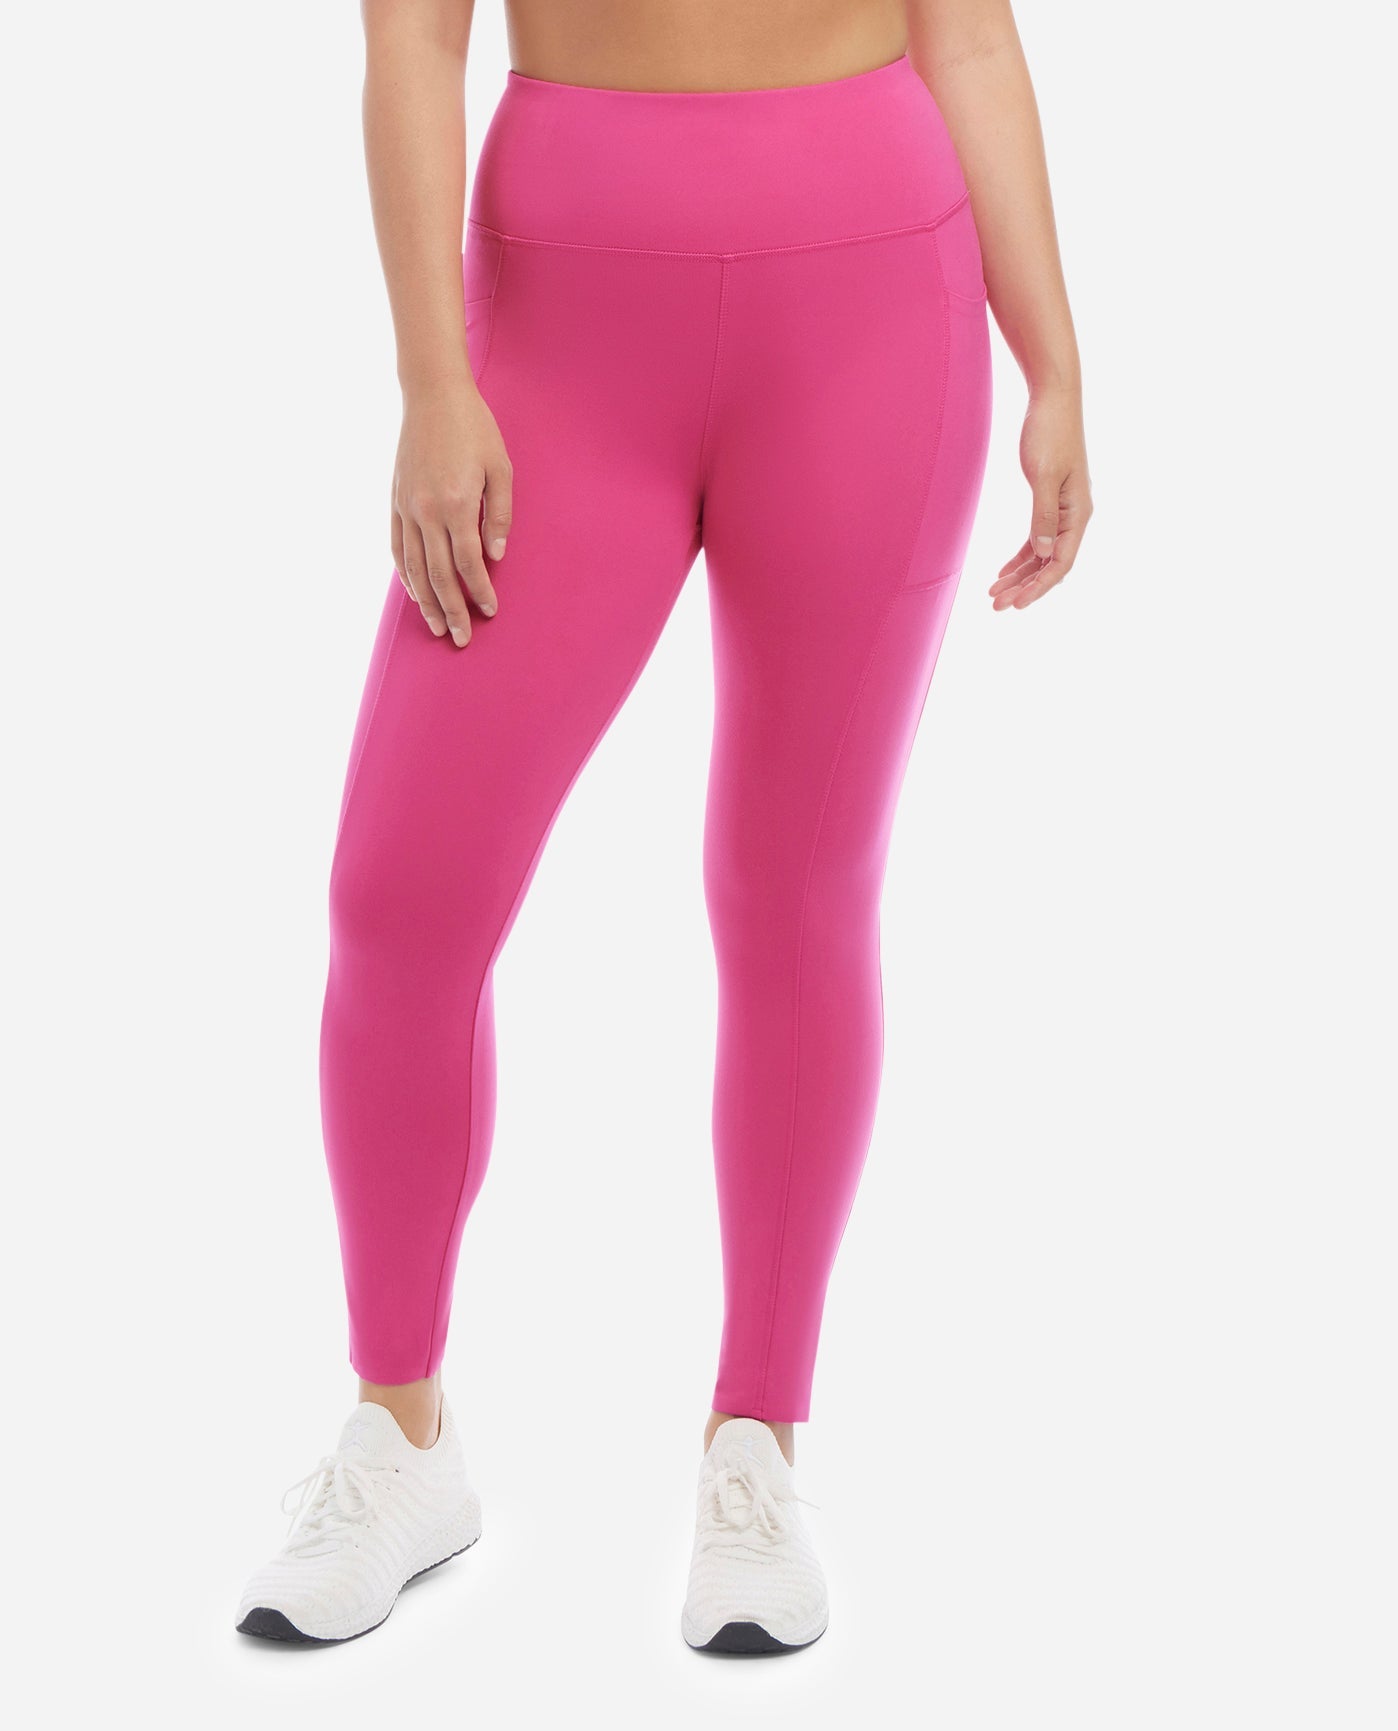 Danskin Women's Performance Leggings with Side Pockets Select Size and  Color NWT - Helia Beer Co